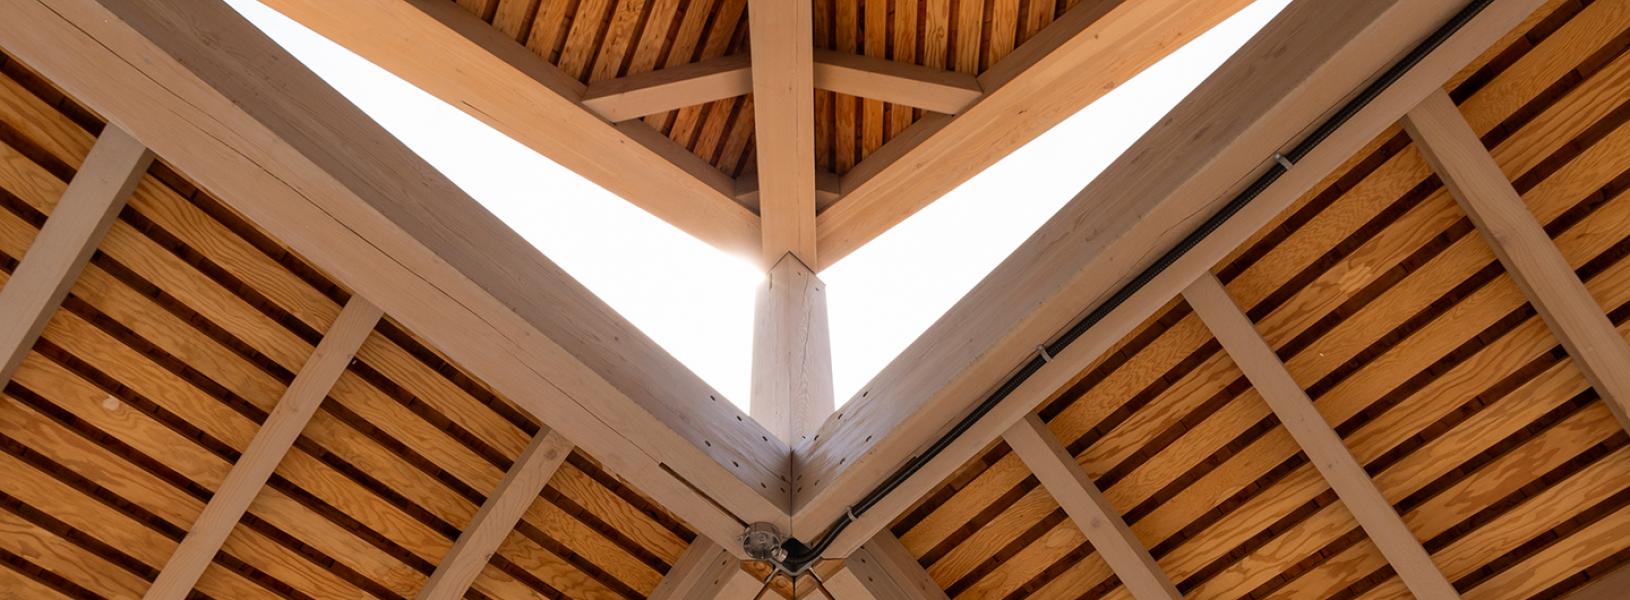 A closeup photo of the ceiling woodwork on the Indigenous Gathering Space.